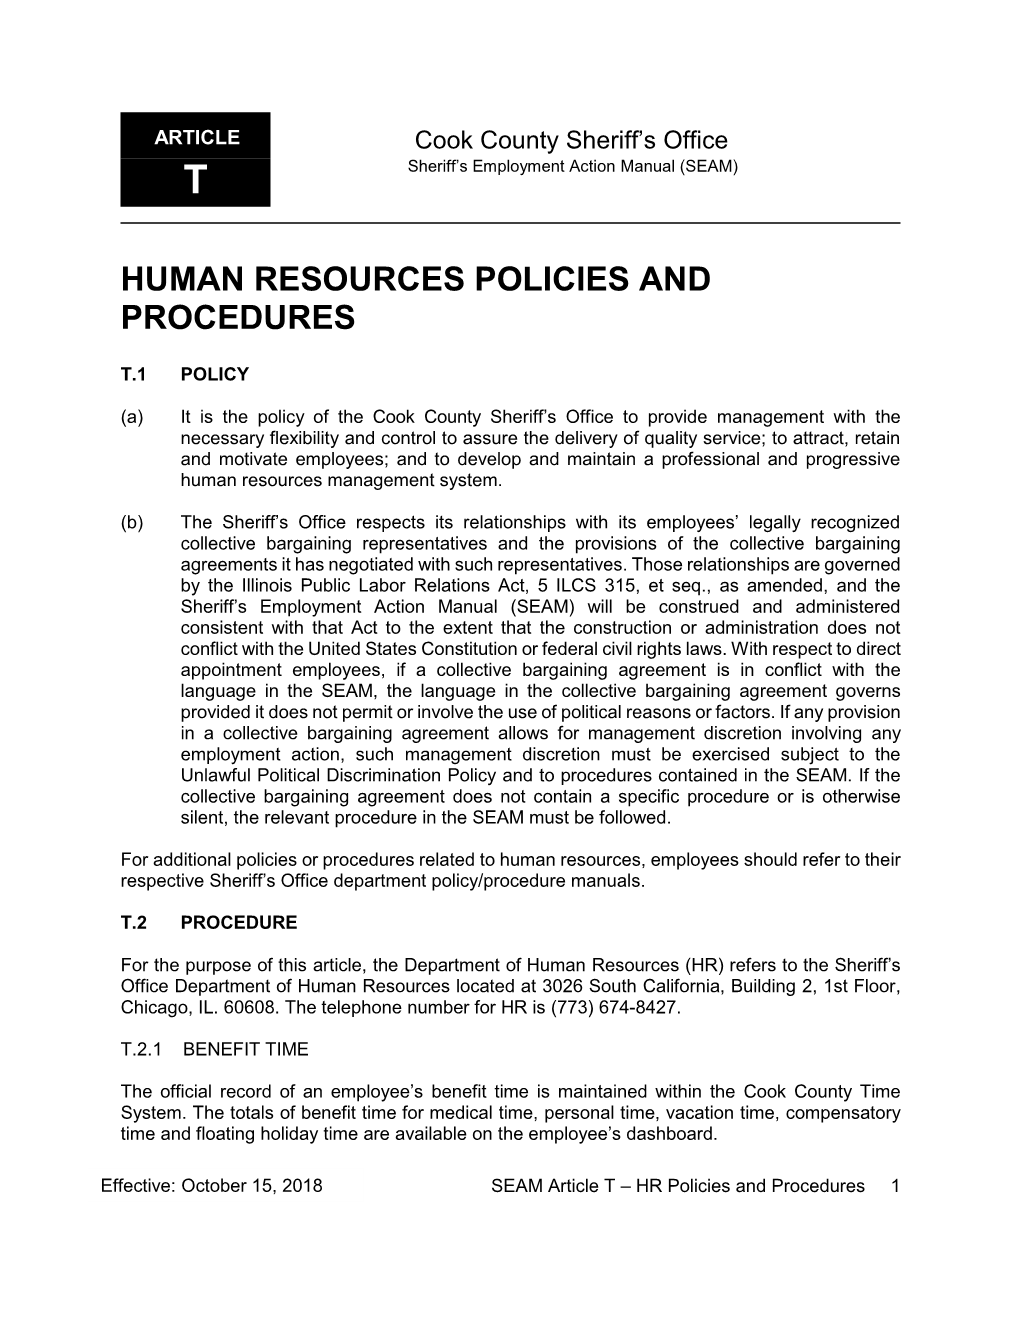 Article T – Human Resources Policies and Procedures